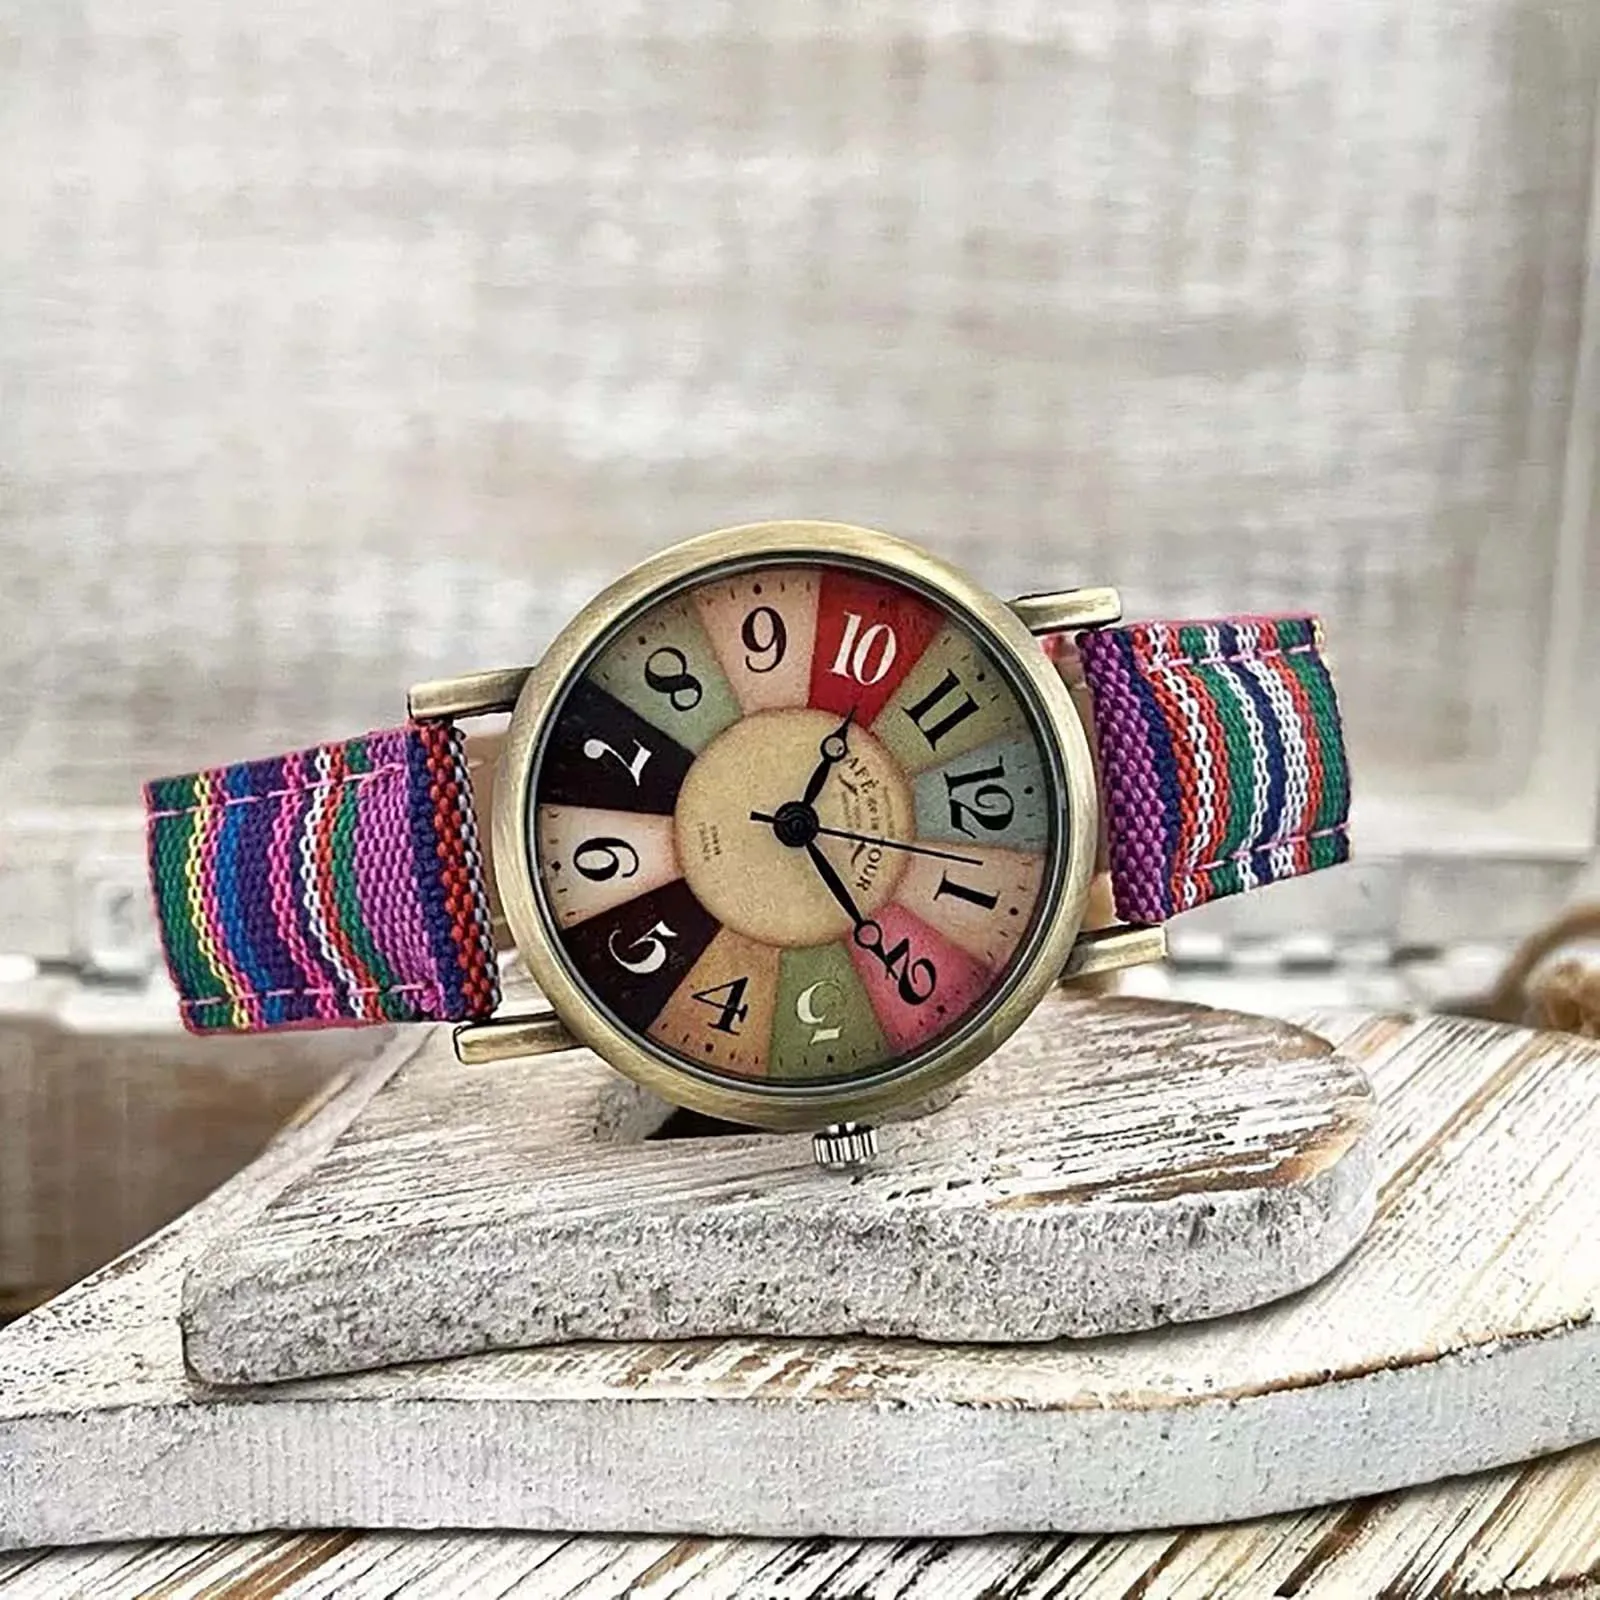 New fashion women's watch with multi-color rainbow pattern men's hand strap watch for women enlarge